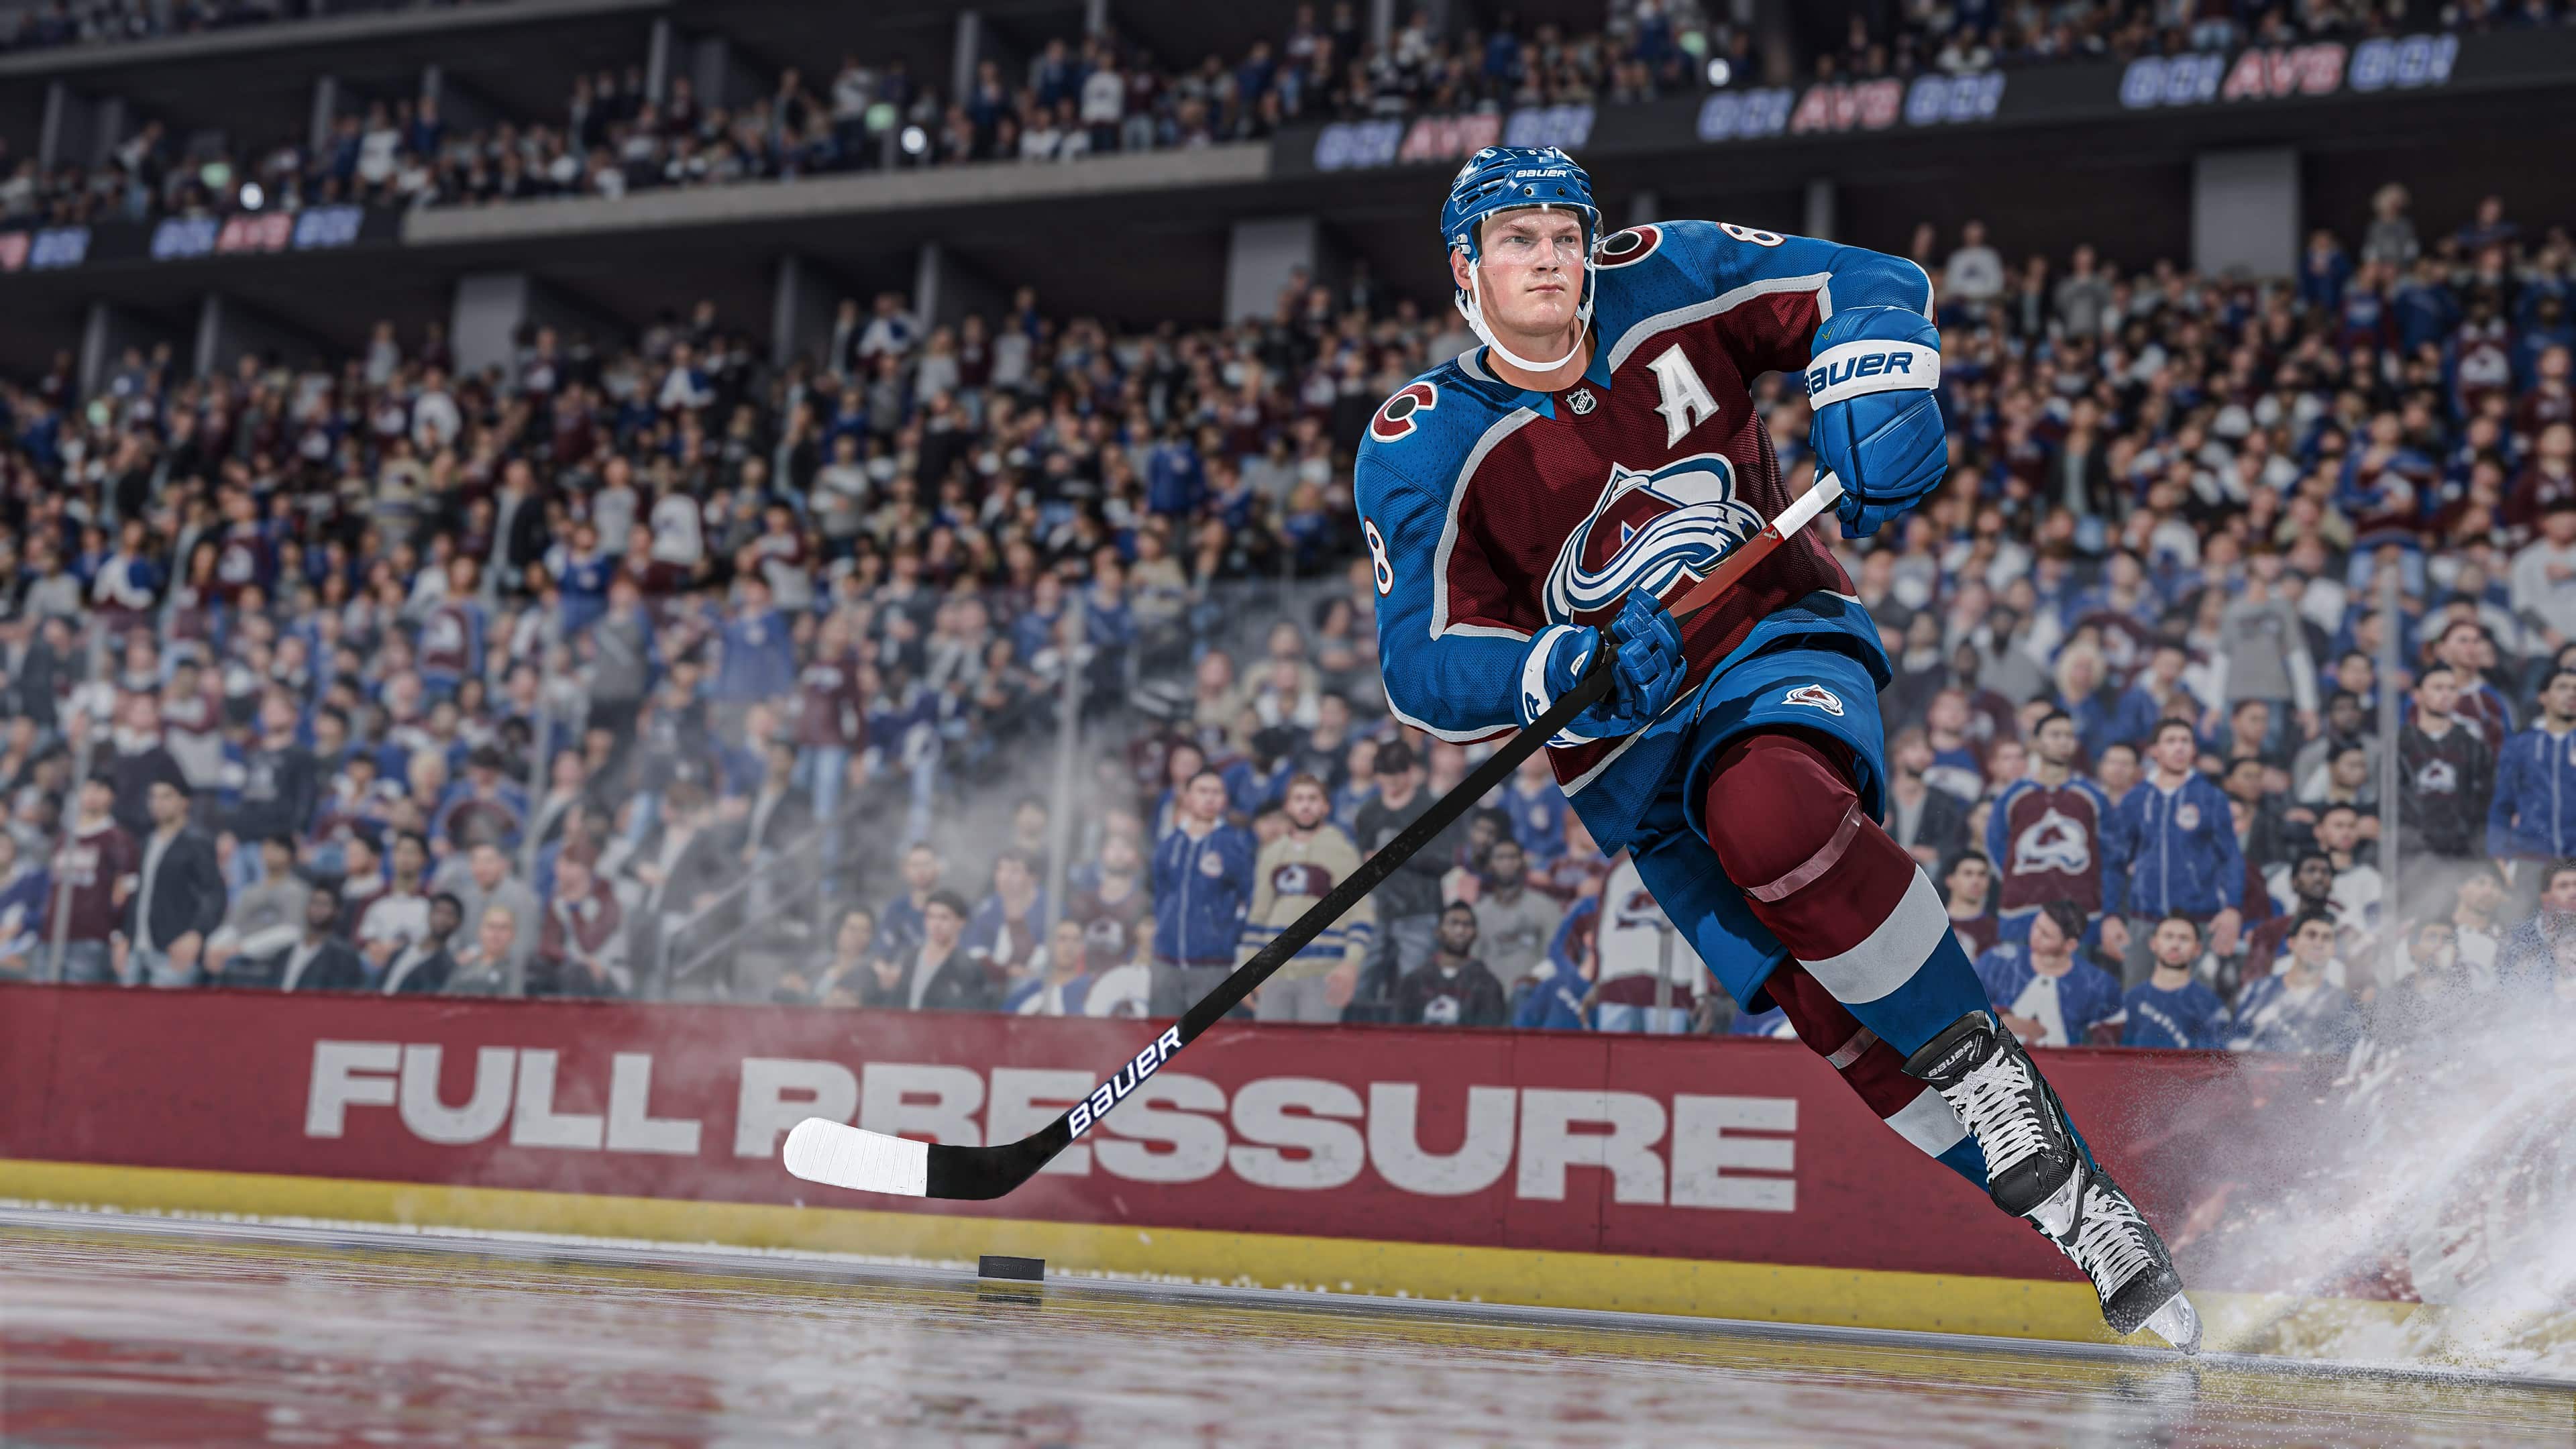 NHL 24 Update 1.11 for October 24 Skates Out for Patch 1.1.1